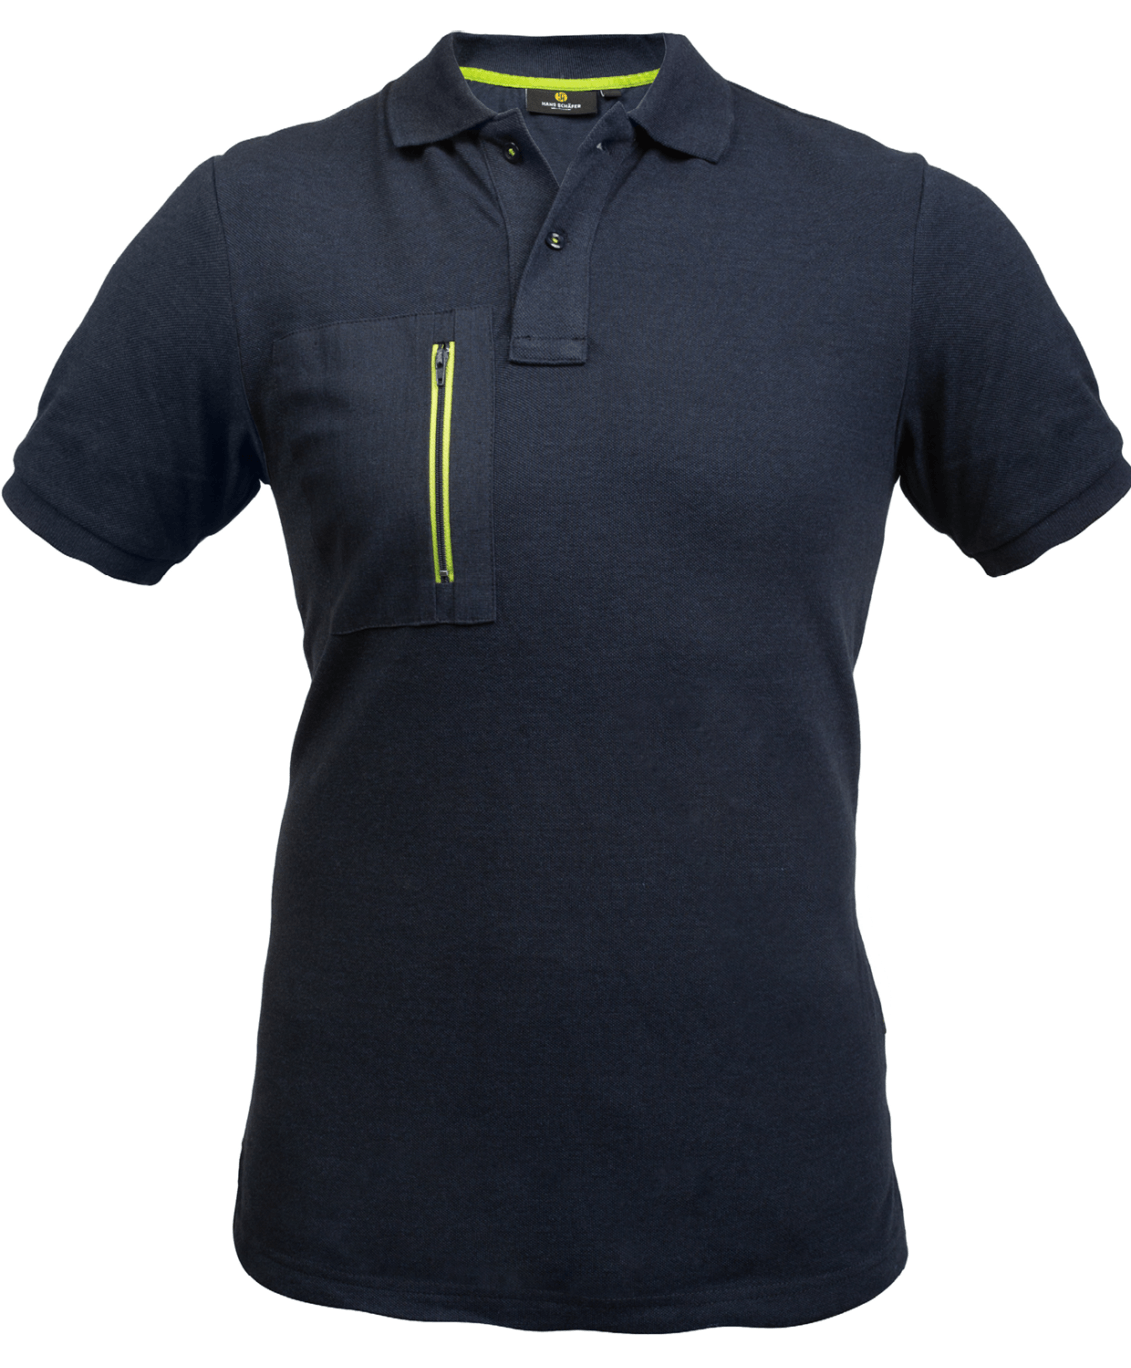 Featured image for “Smart Poloshirt”